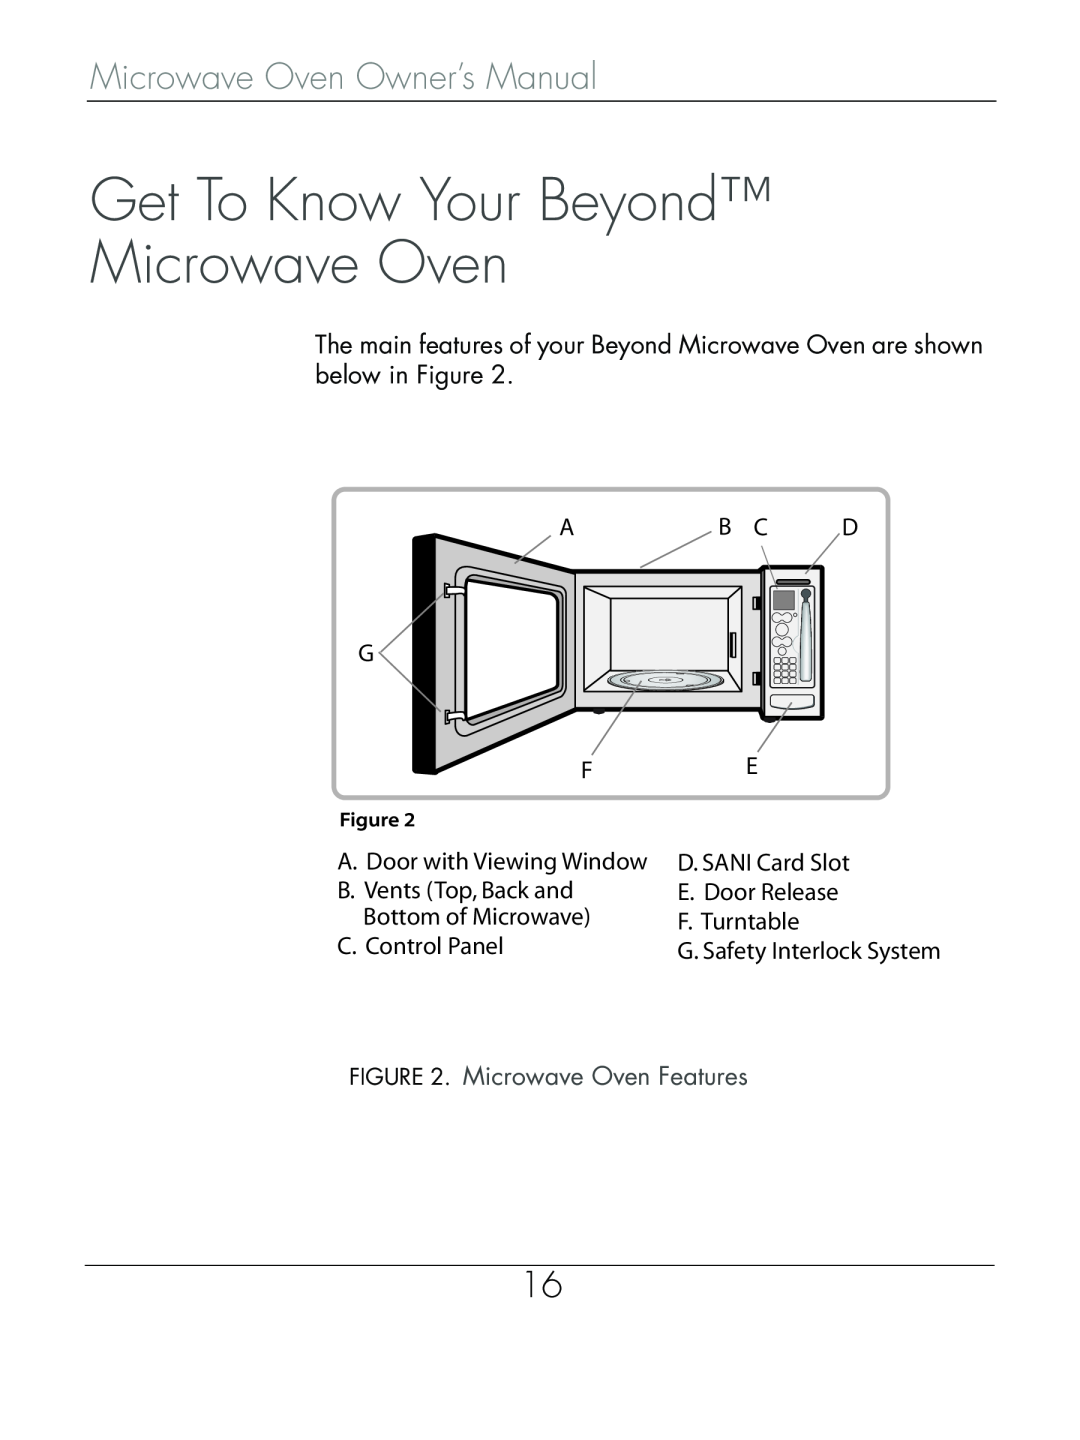 Beyond Microwace Oven manual Get To Know Your Beyond Microwave Oven, Microwave Oven Features 